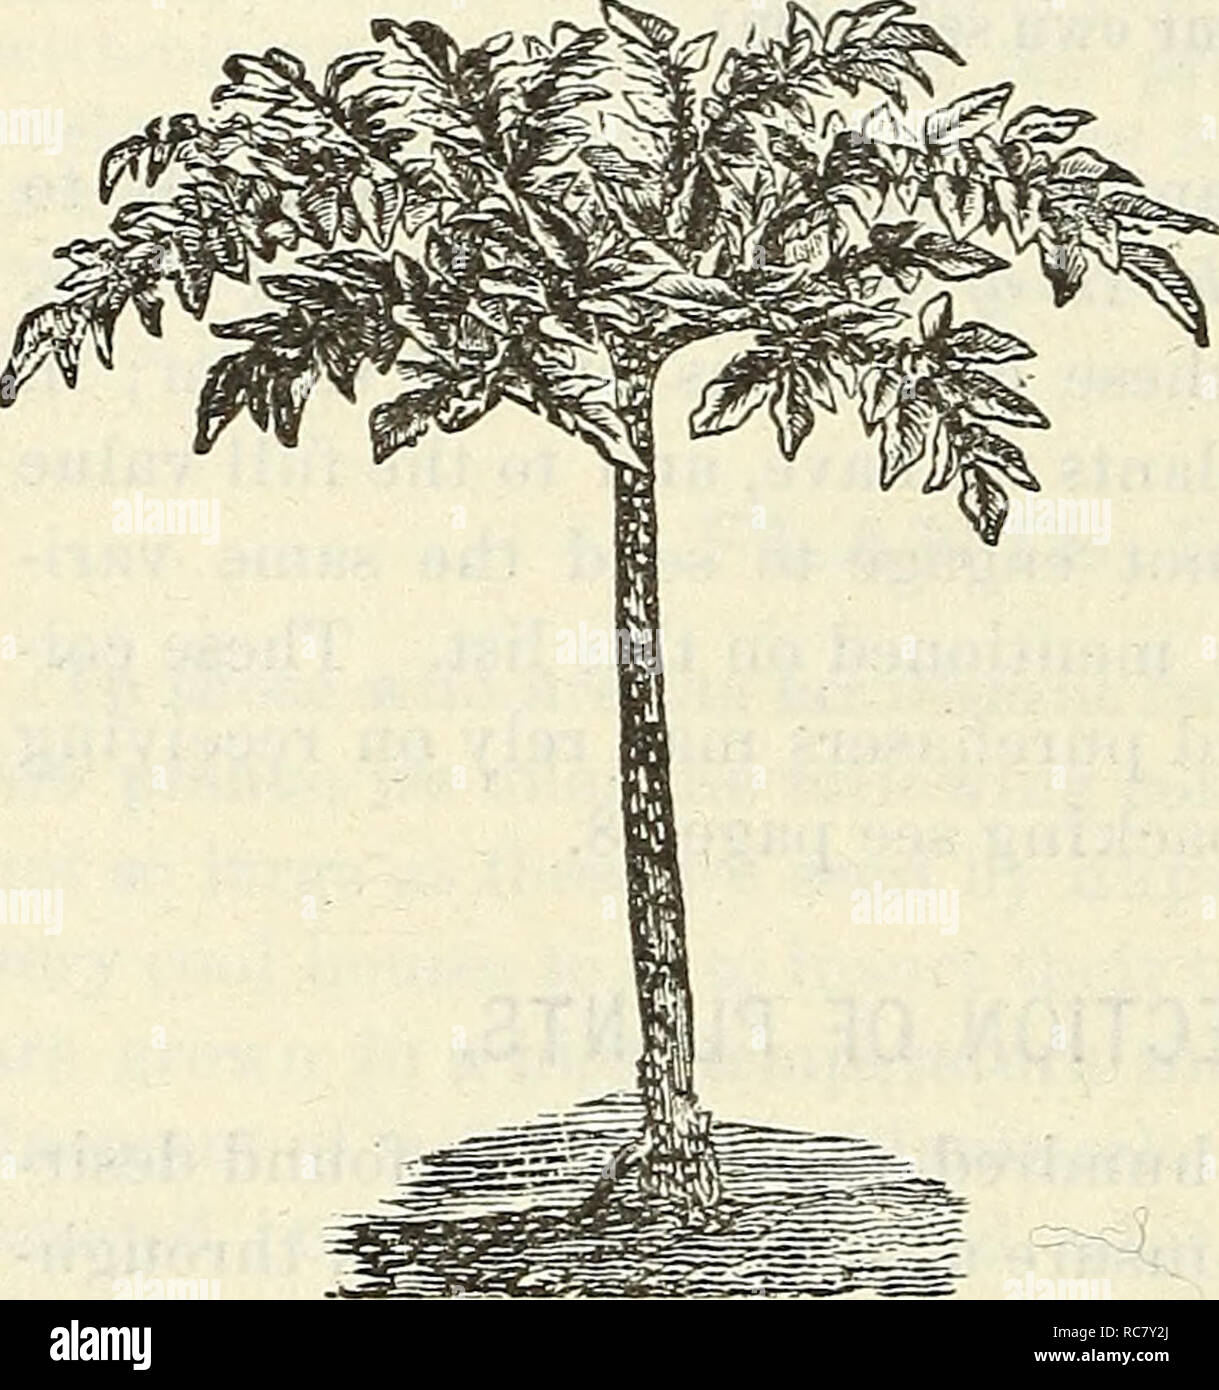 . Dreer's garden calendar : 1875. Seeds Catalogs; Nursery stock Catalogs; Gardening Catalogs; Flowers Seeds Catalogs. 100 Dreer''s Garden Calendar. NEW AND RARE PLANTS FOR 1875.. AMORPHOPHALLUS RIVIERI. A new Ariod, of easy out-door culture, producing a solitary palm- like leaf on a rose and olive-green speckled stem, two to three feet high. The tubers, maturing the second year, produce flowers like the &quot; Calla Lily;&quot; the outside of a similar color to the leaf stalk, the inside deep blood-red, veined with black. Tubers are planted out in May, and kept over winter like Dahlia roots. L Stock Photo